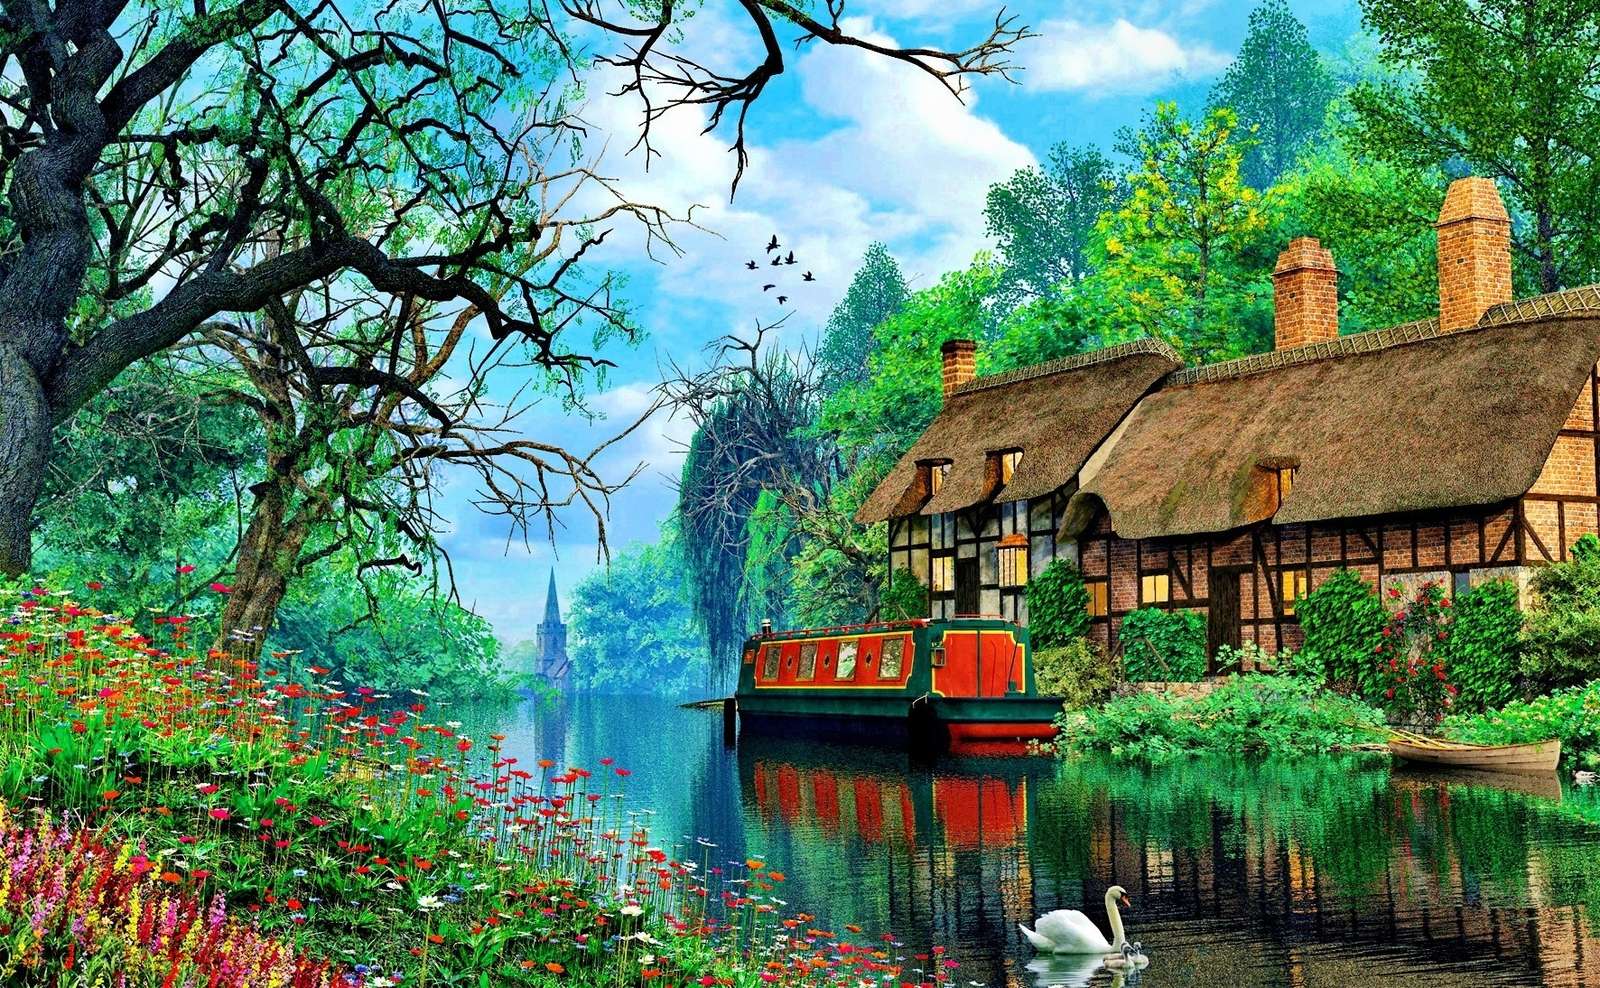 Cottage on the river jigsaw puzzle online